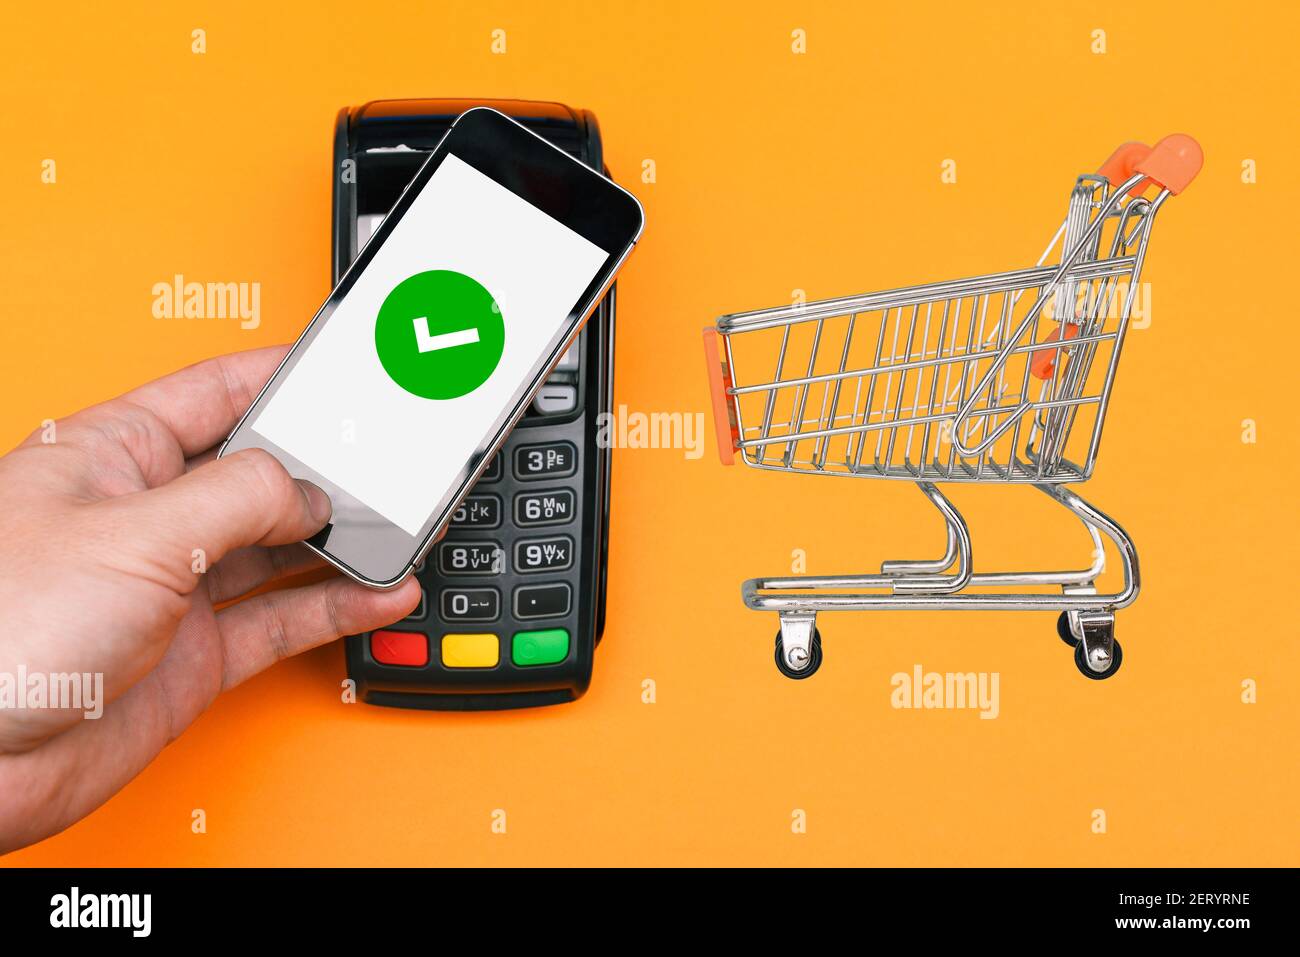 Electronic payment Pos terminal and shopping trolley from the mall. Successful payment with confirmation on the smartphone screen. Contactless method Stock Photo